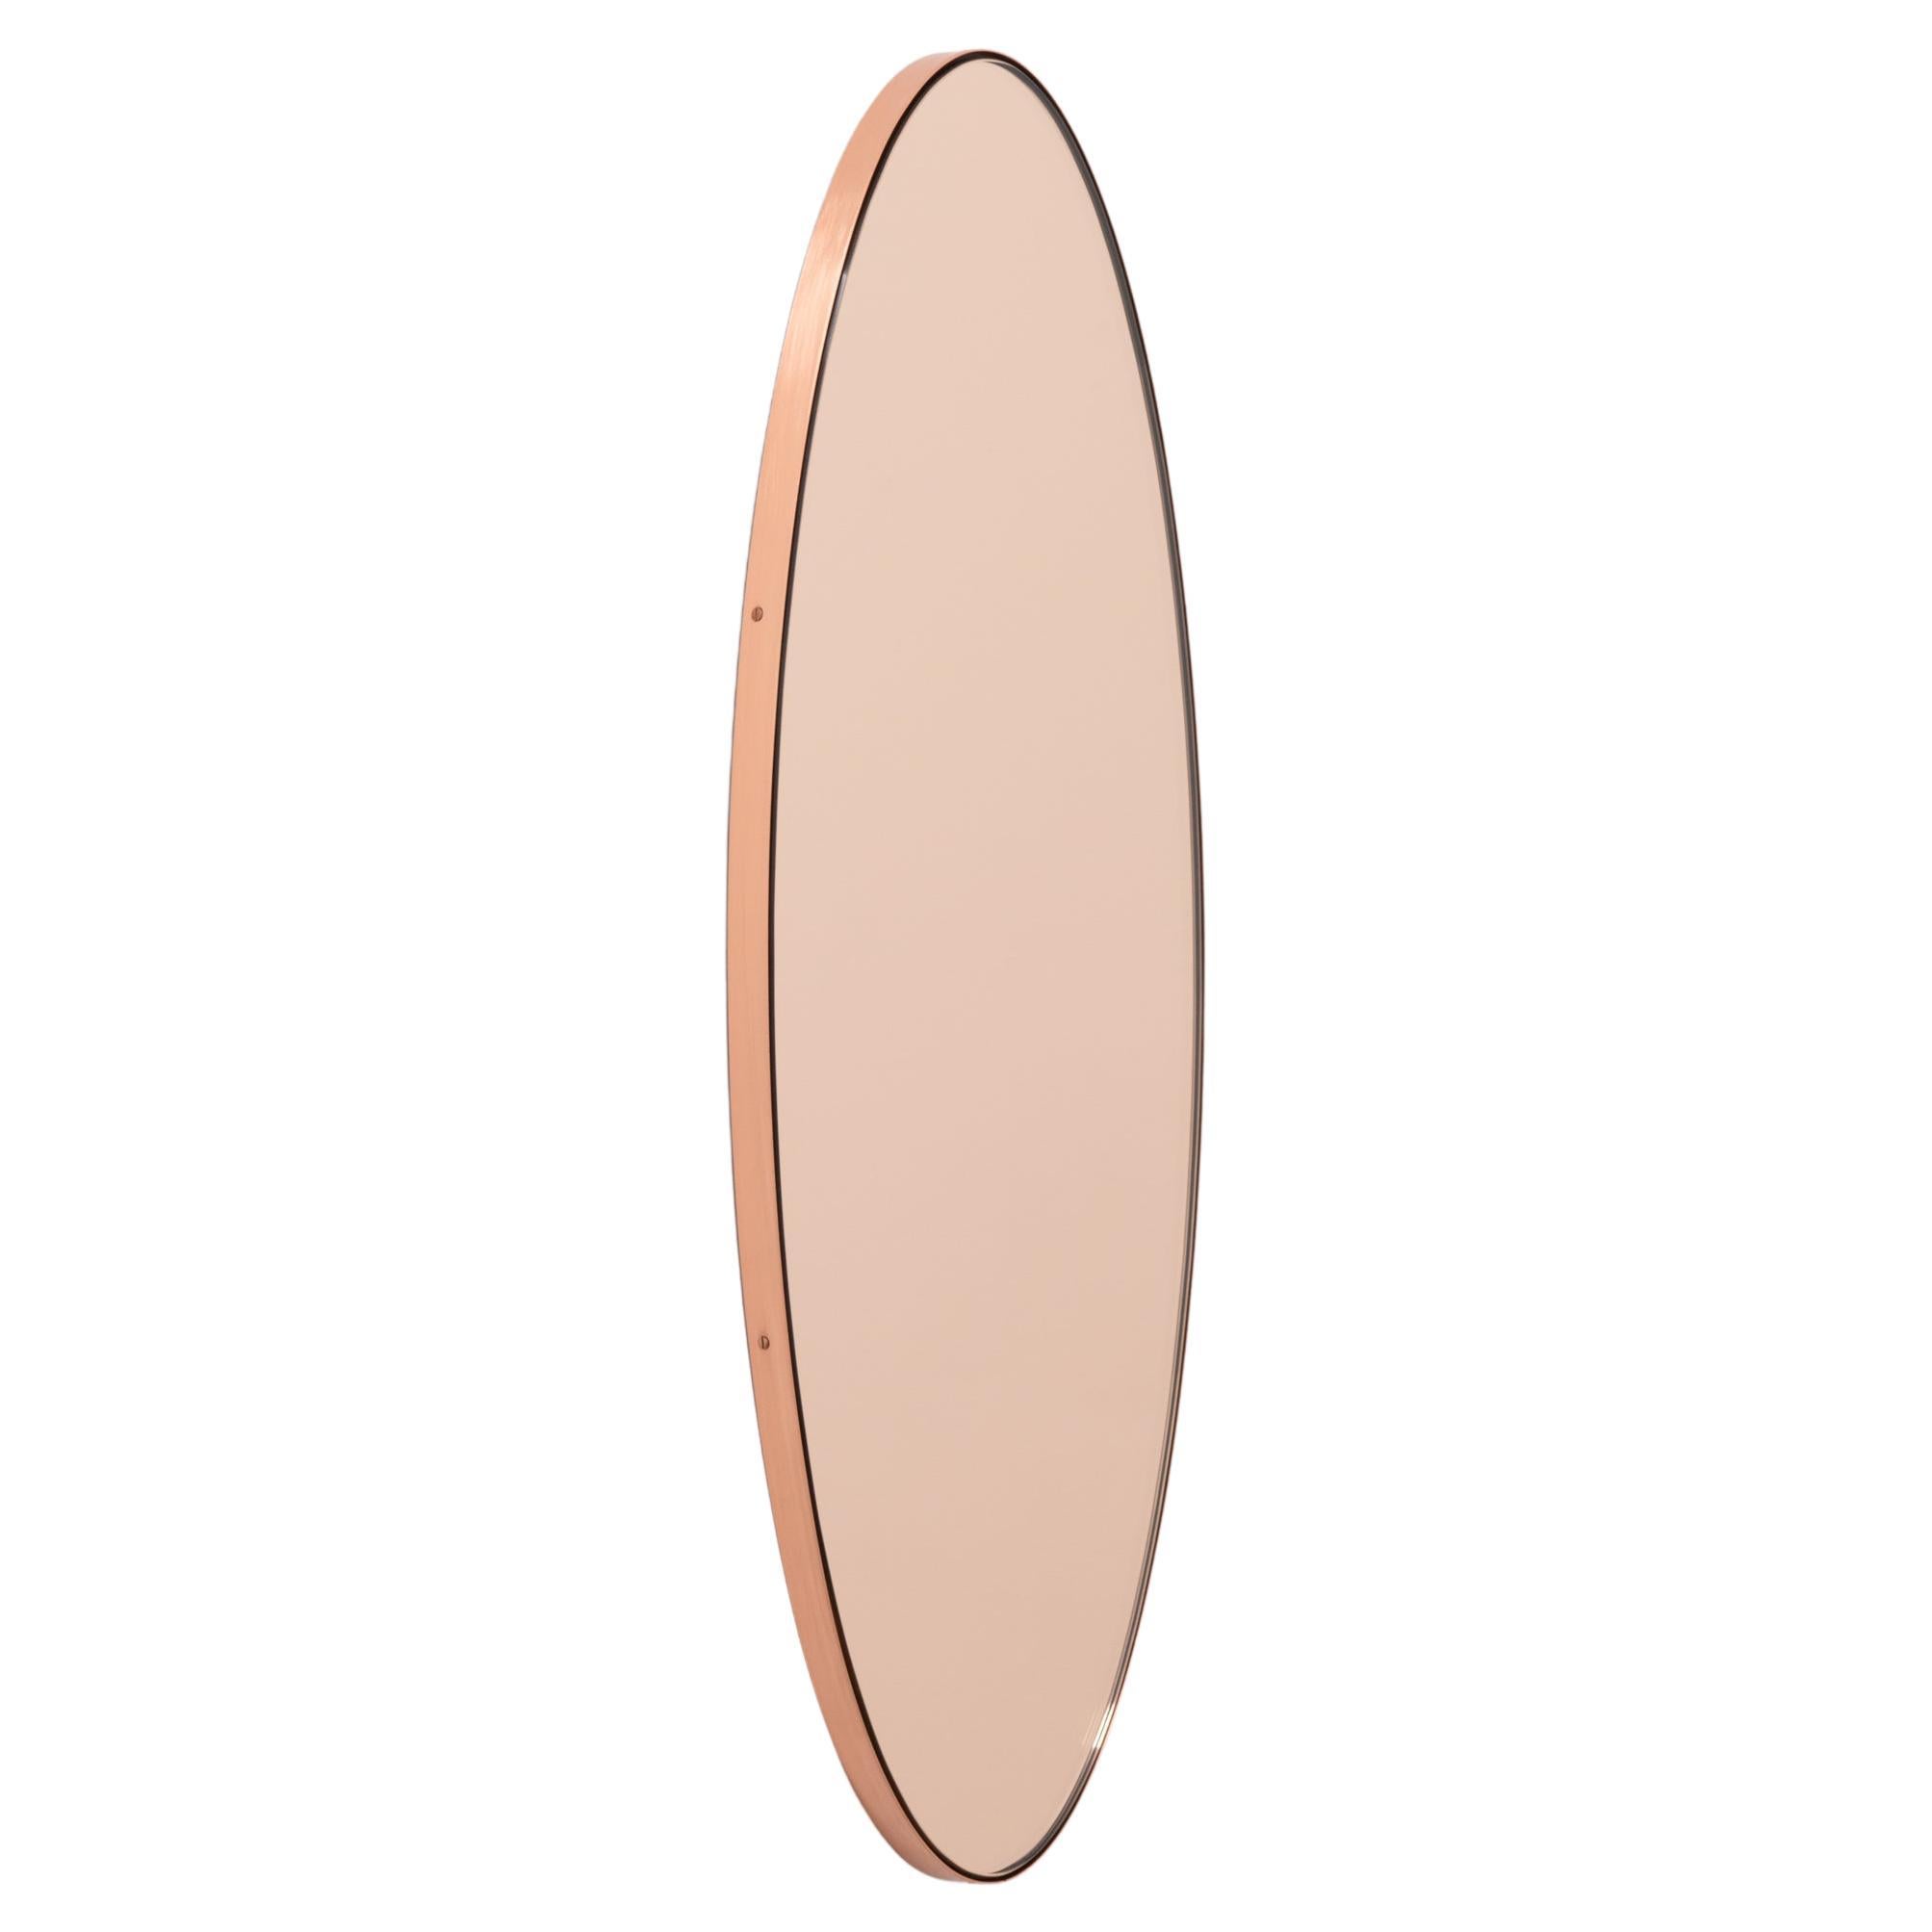 Ovalis Oval Peach Rose Gold Handcrafted Mirror with Copper Frame, Large